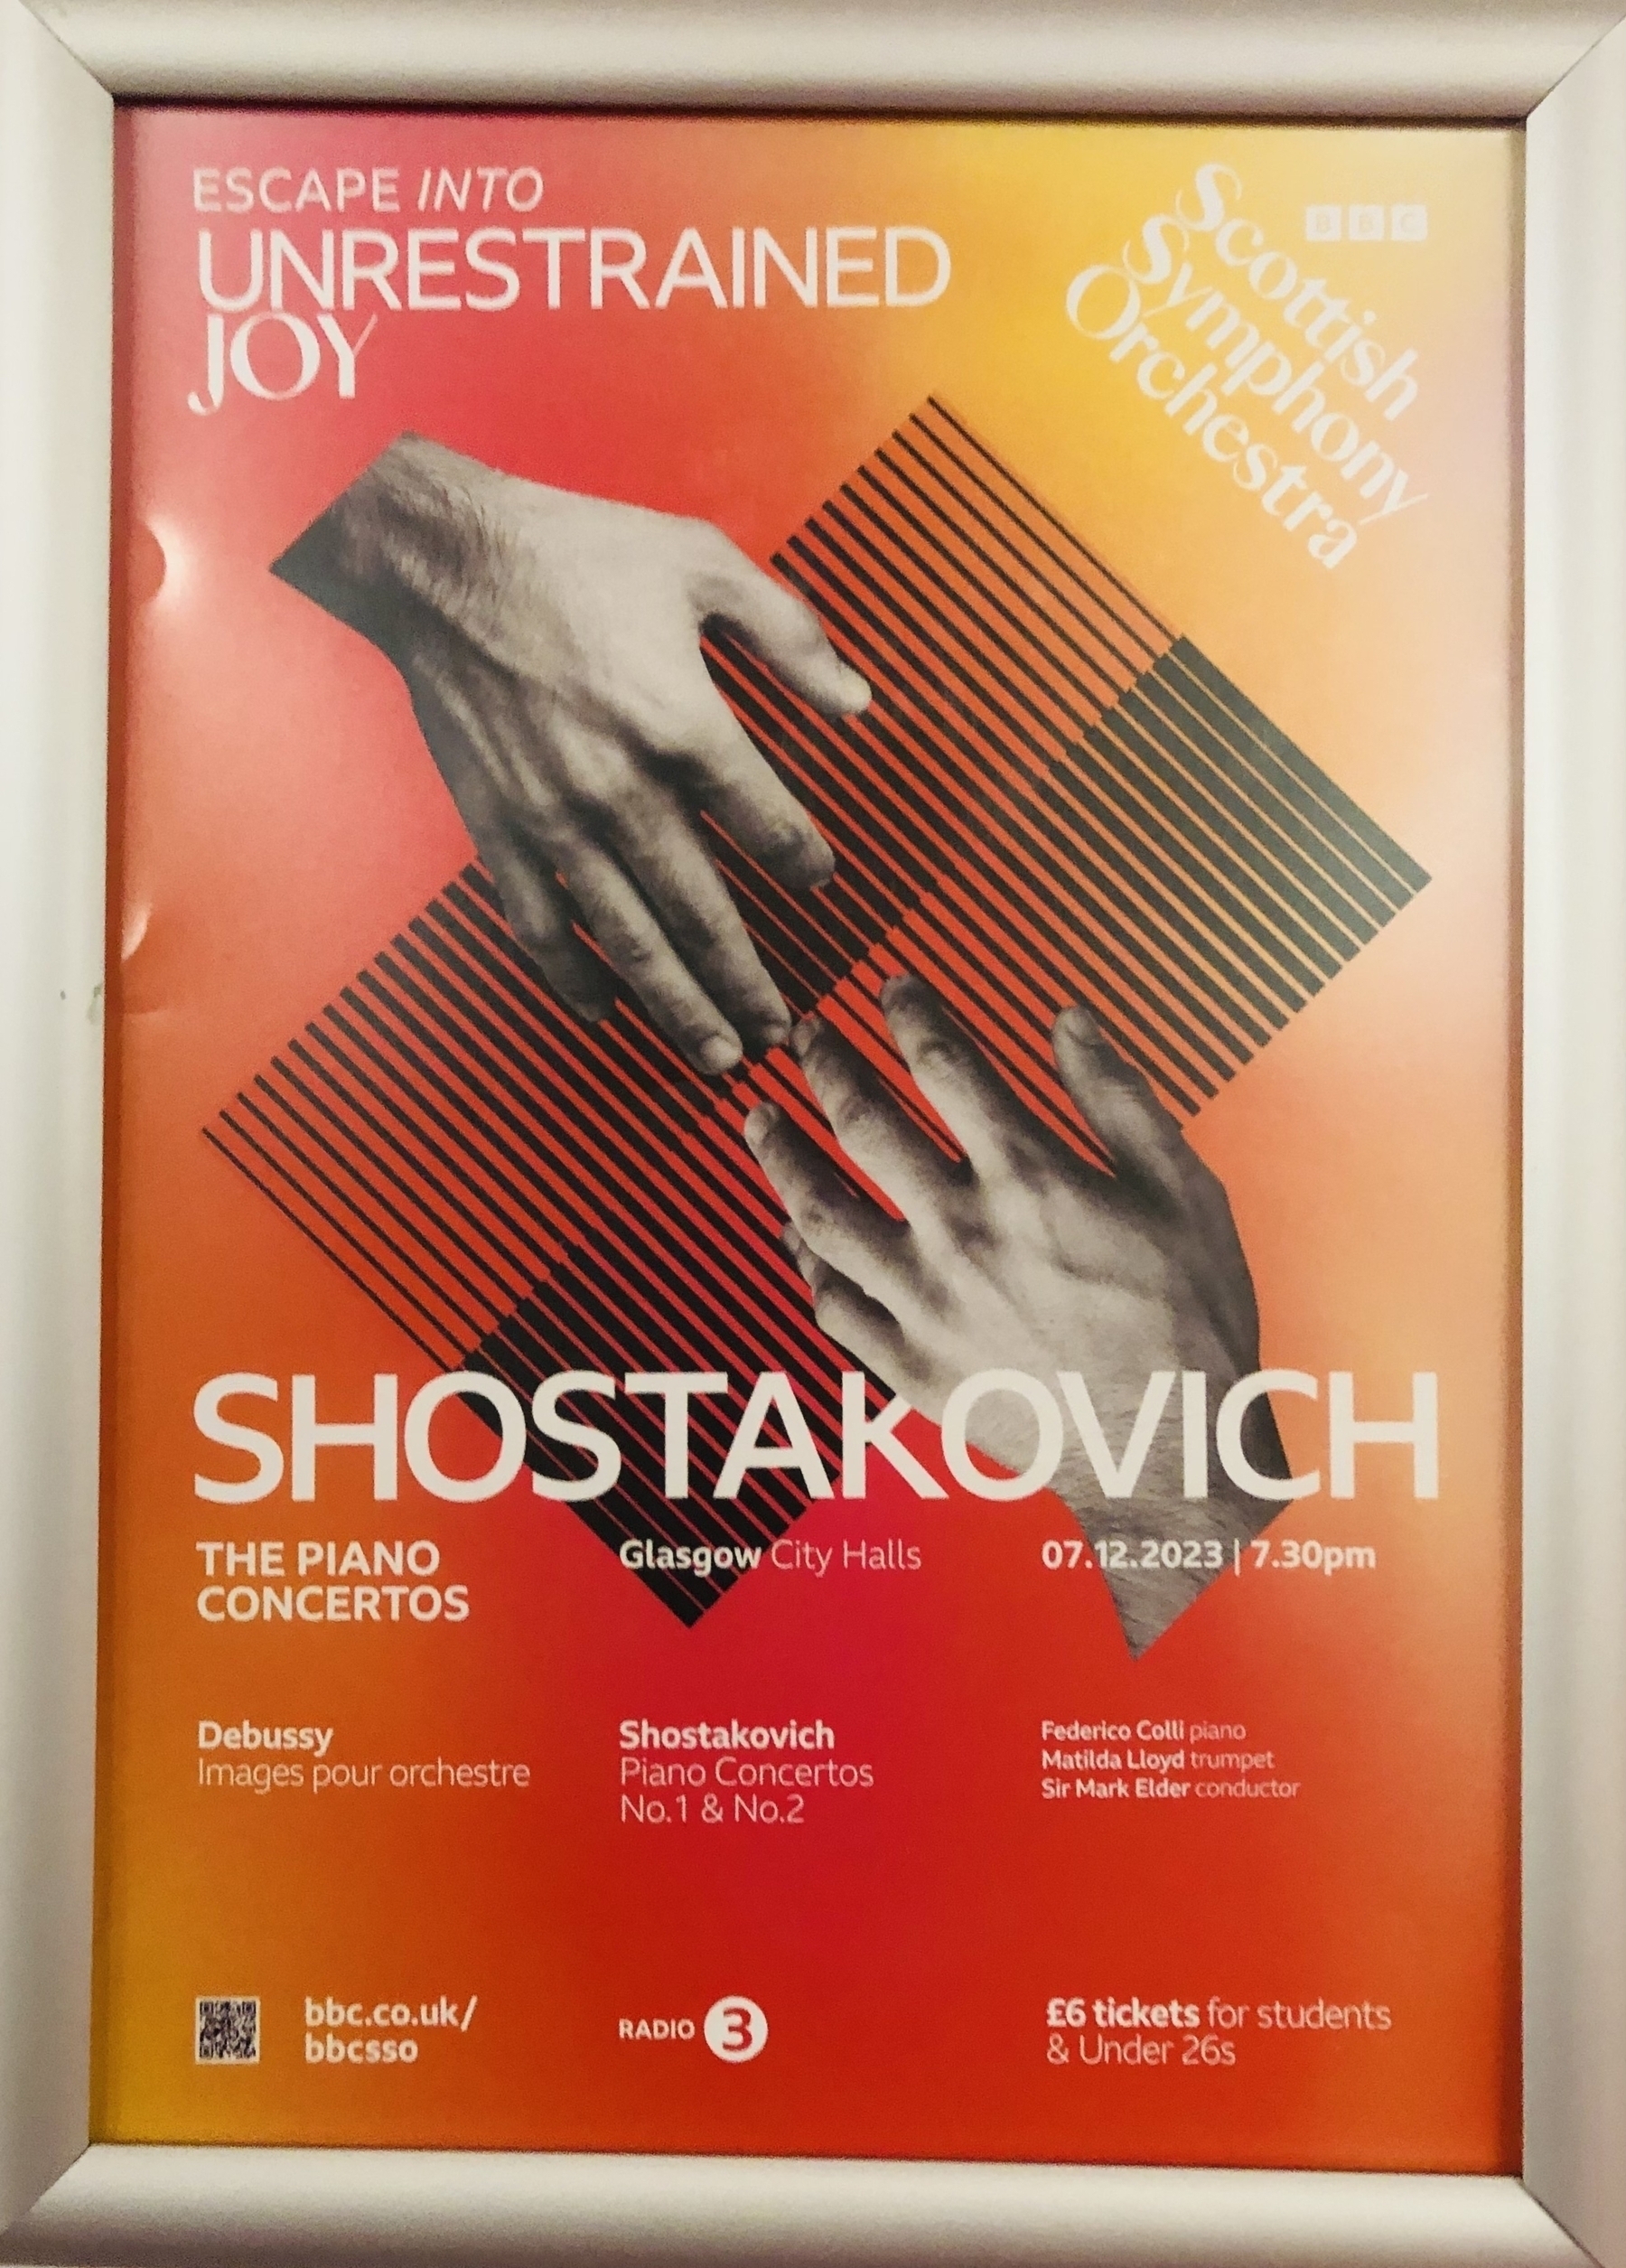 Poster advertising an evening of Shostakovich and Debussy